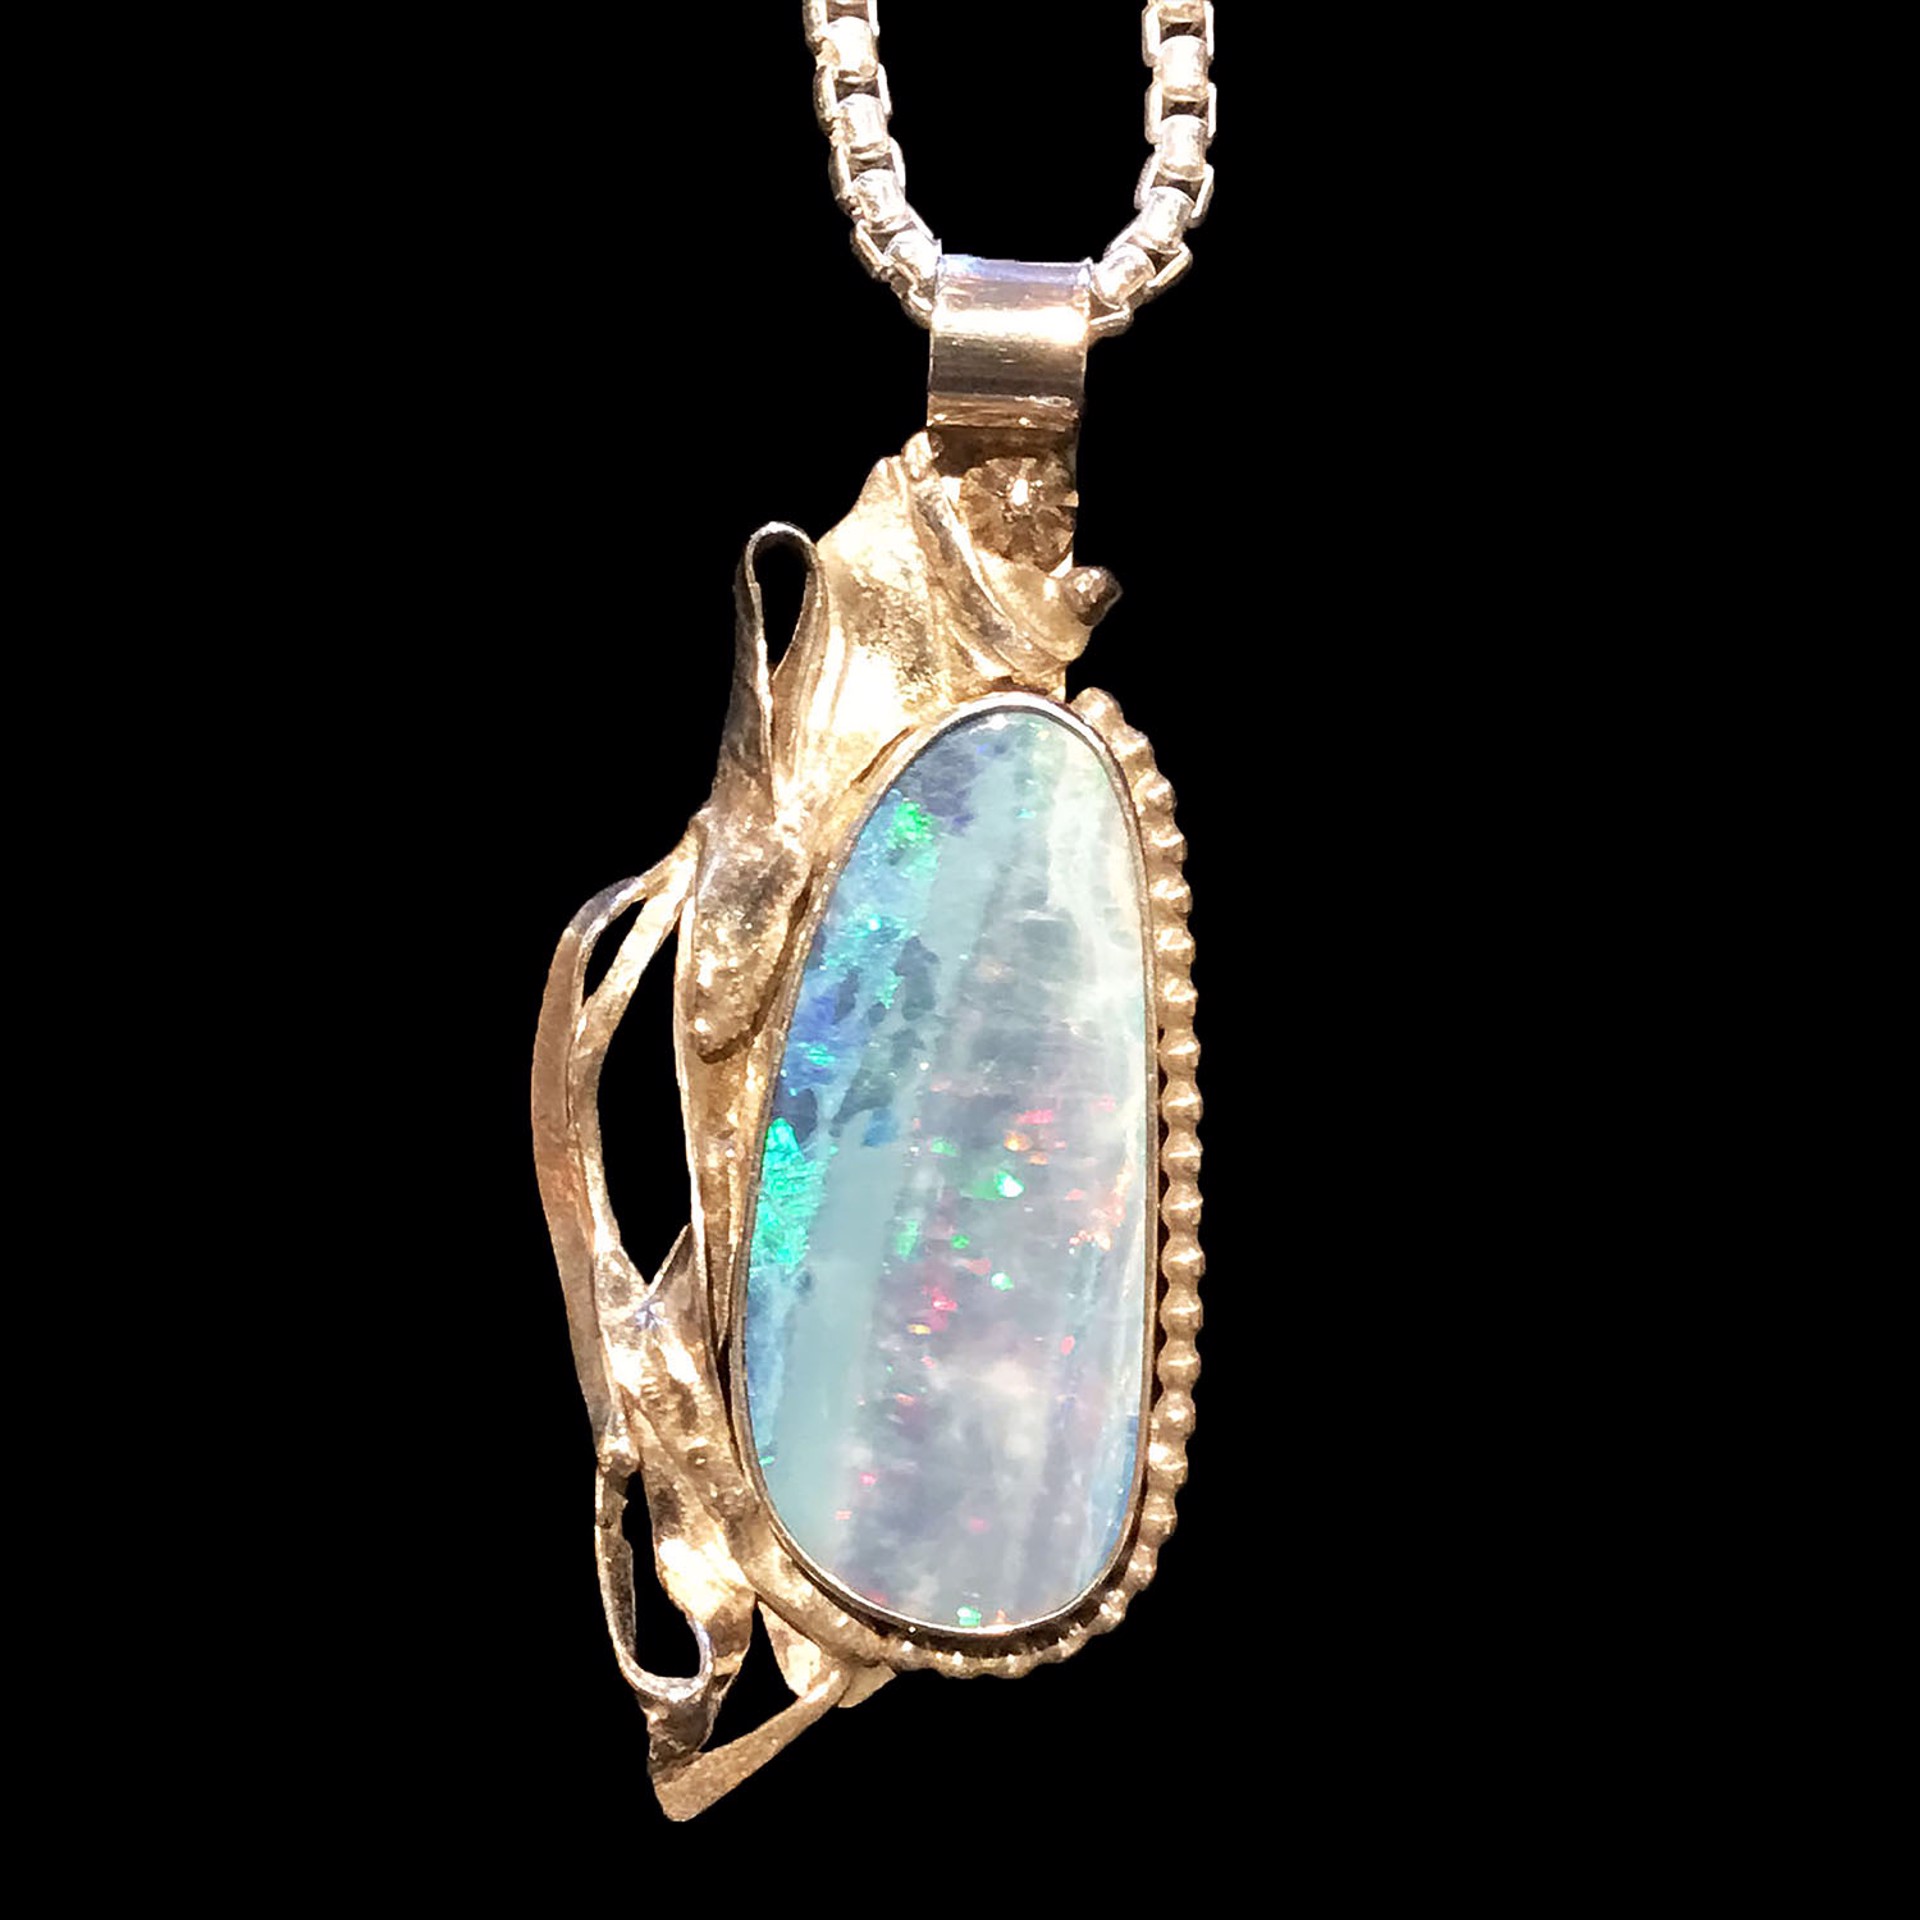 Australian Opal with pinfire & fused silver by Michael Redhawk